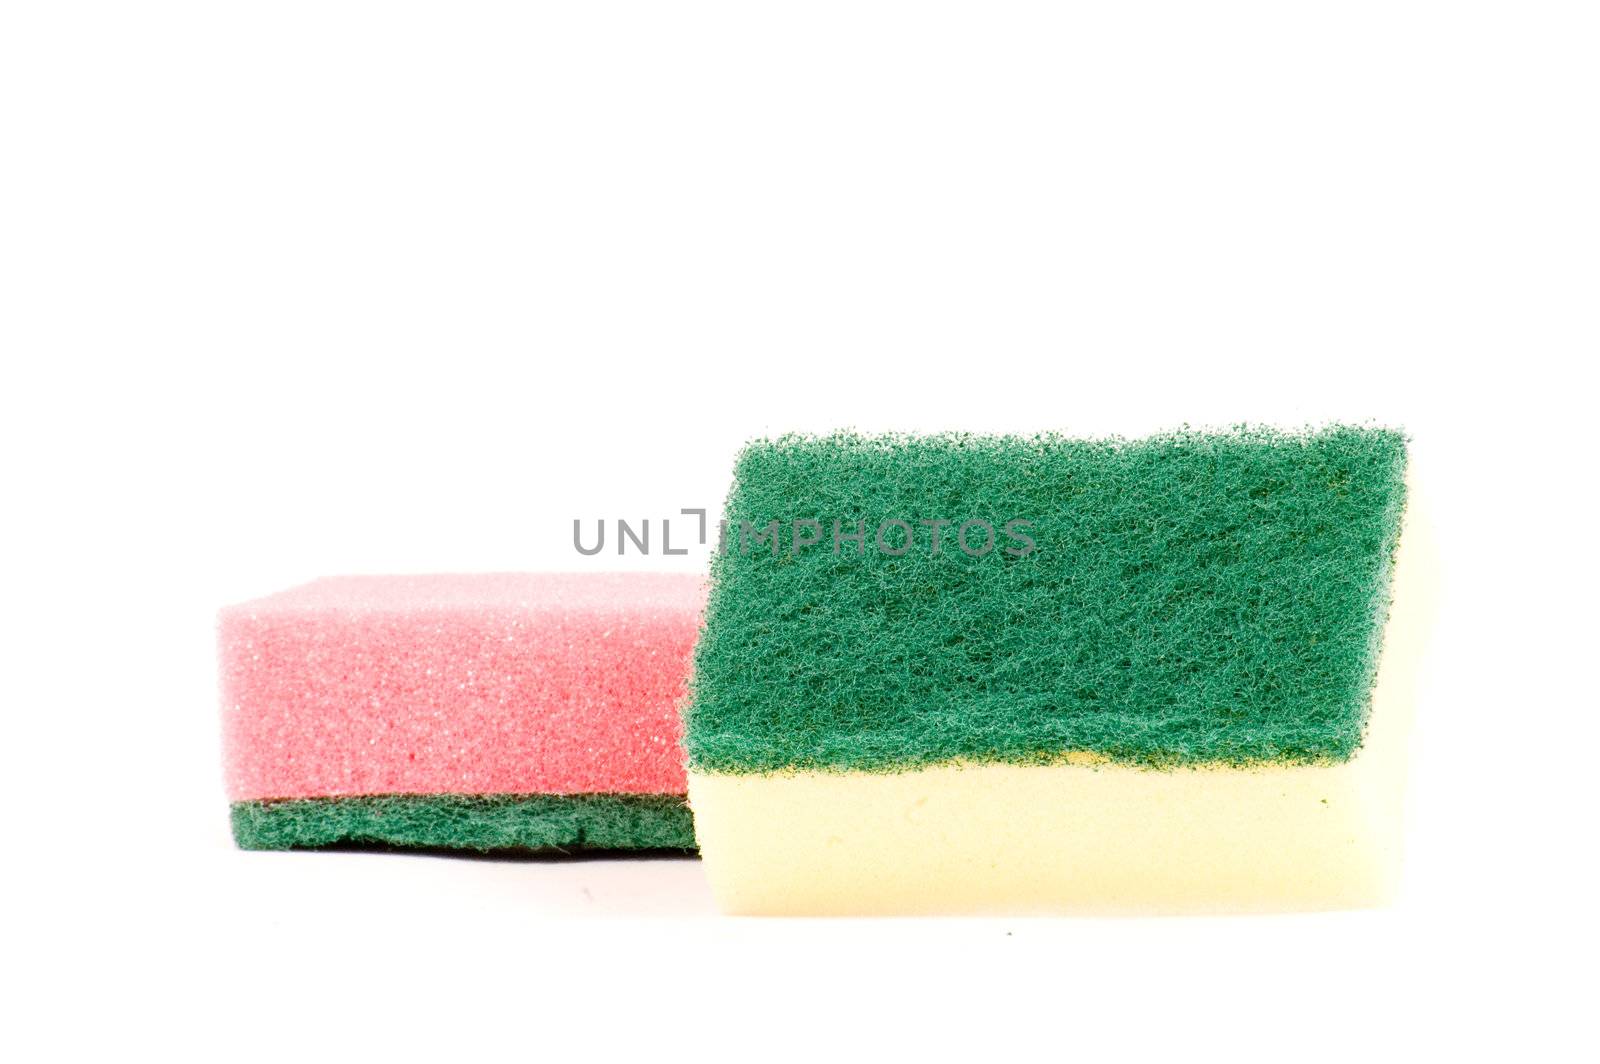 Two cleaning sponges, isolated on white background

